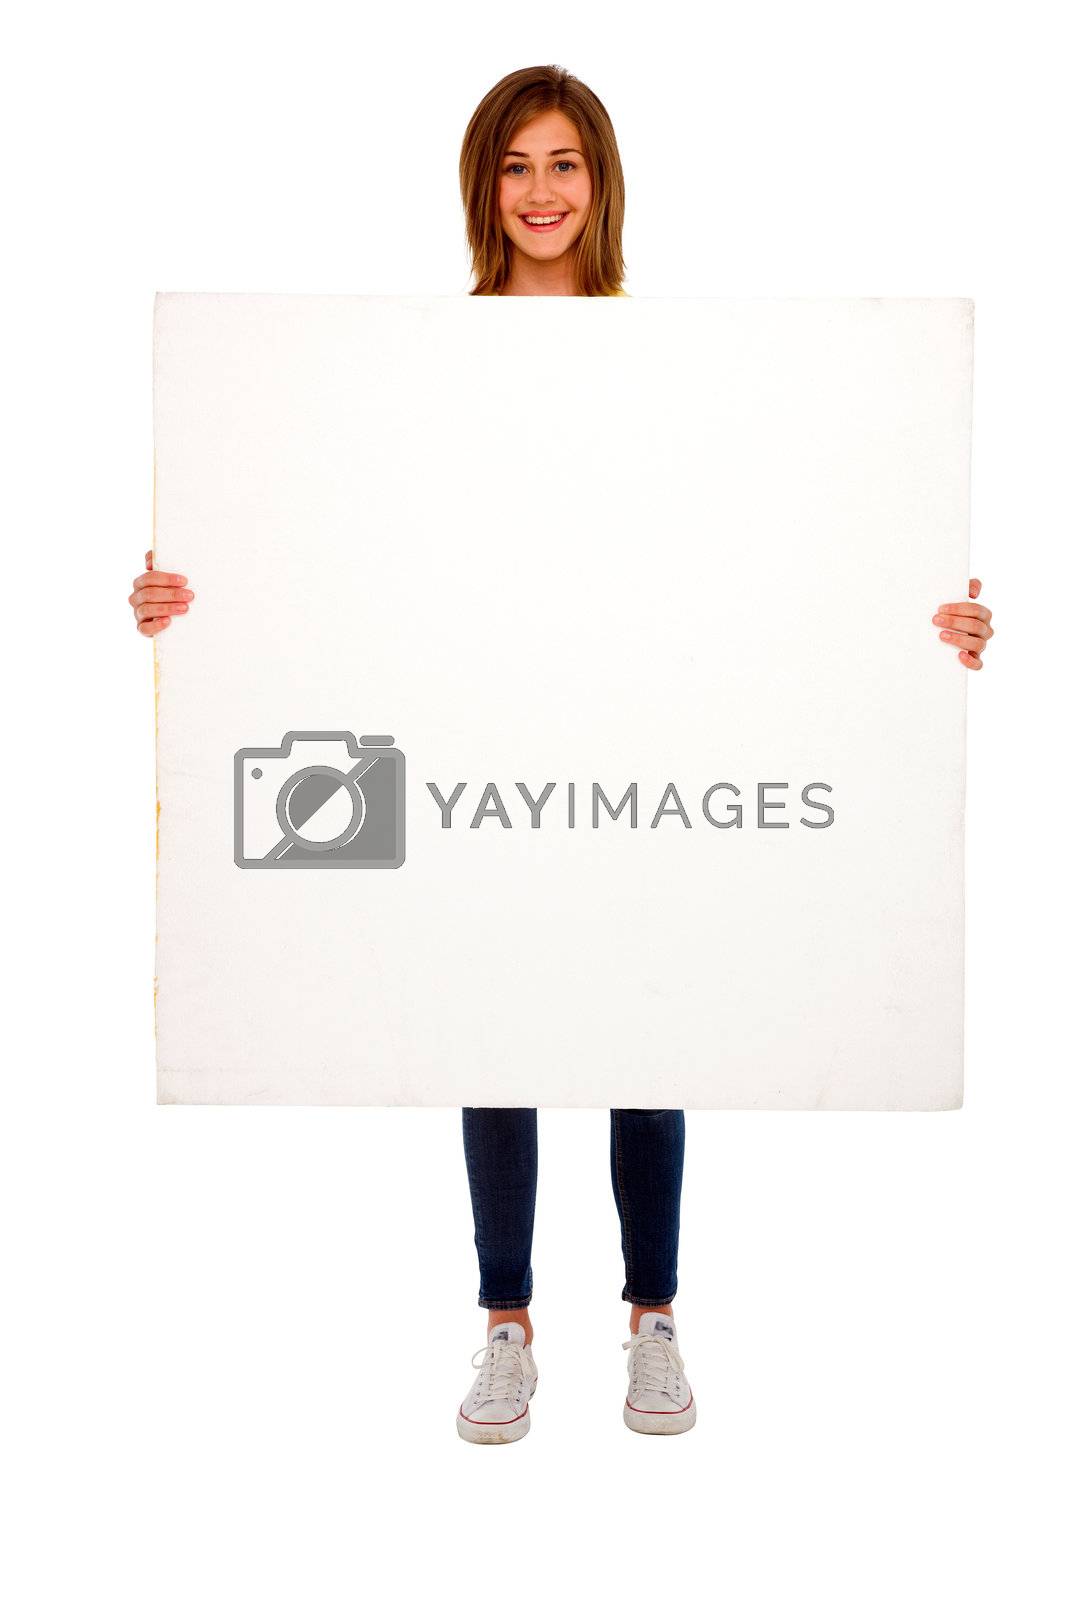 Royalty free image of teenage girl with white panel by ambro